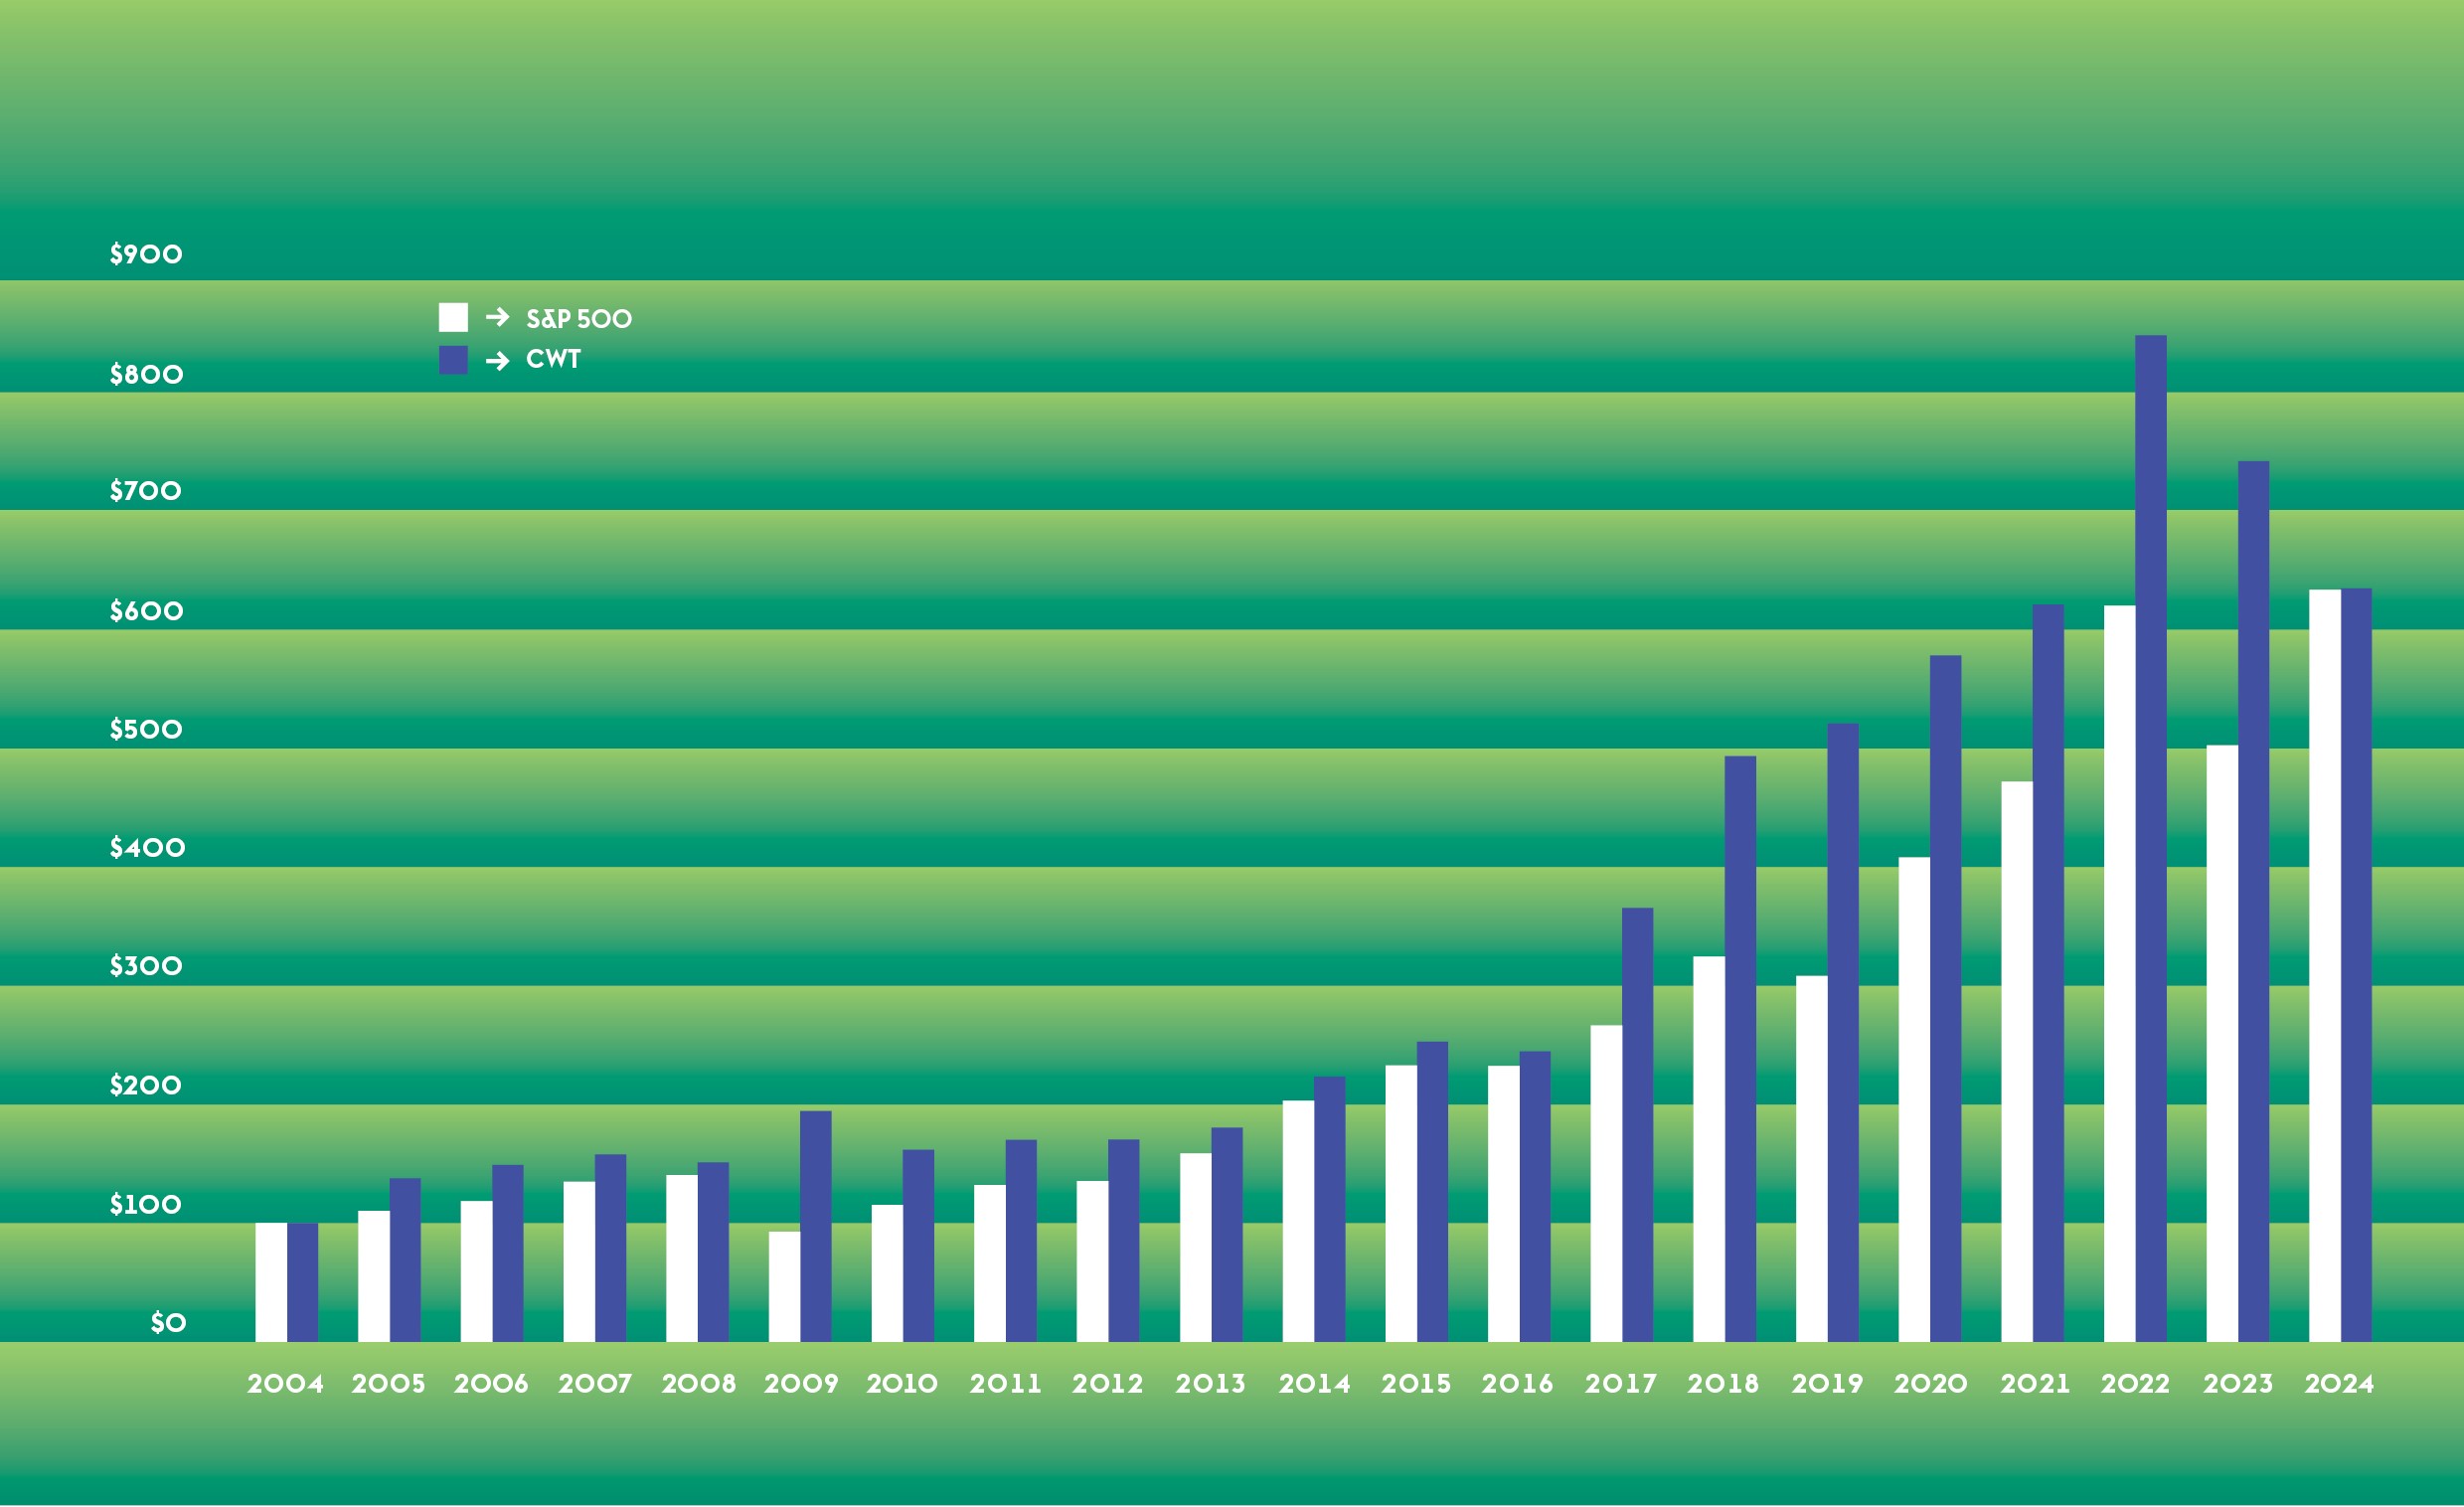 Grouped bar chart showing the return of investment for both S&P 500 and CWT, for the years 2004 to 2024